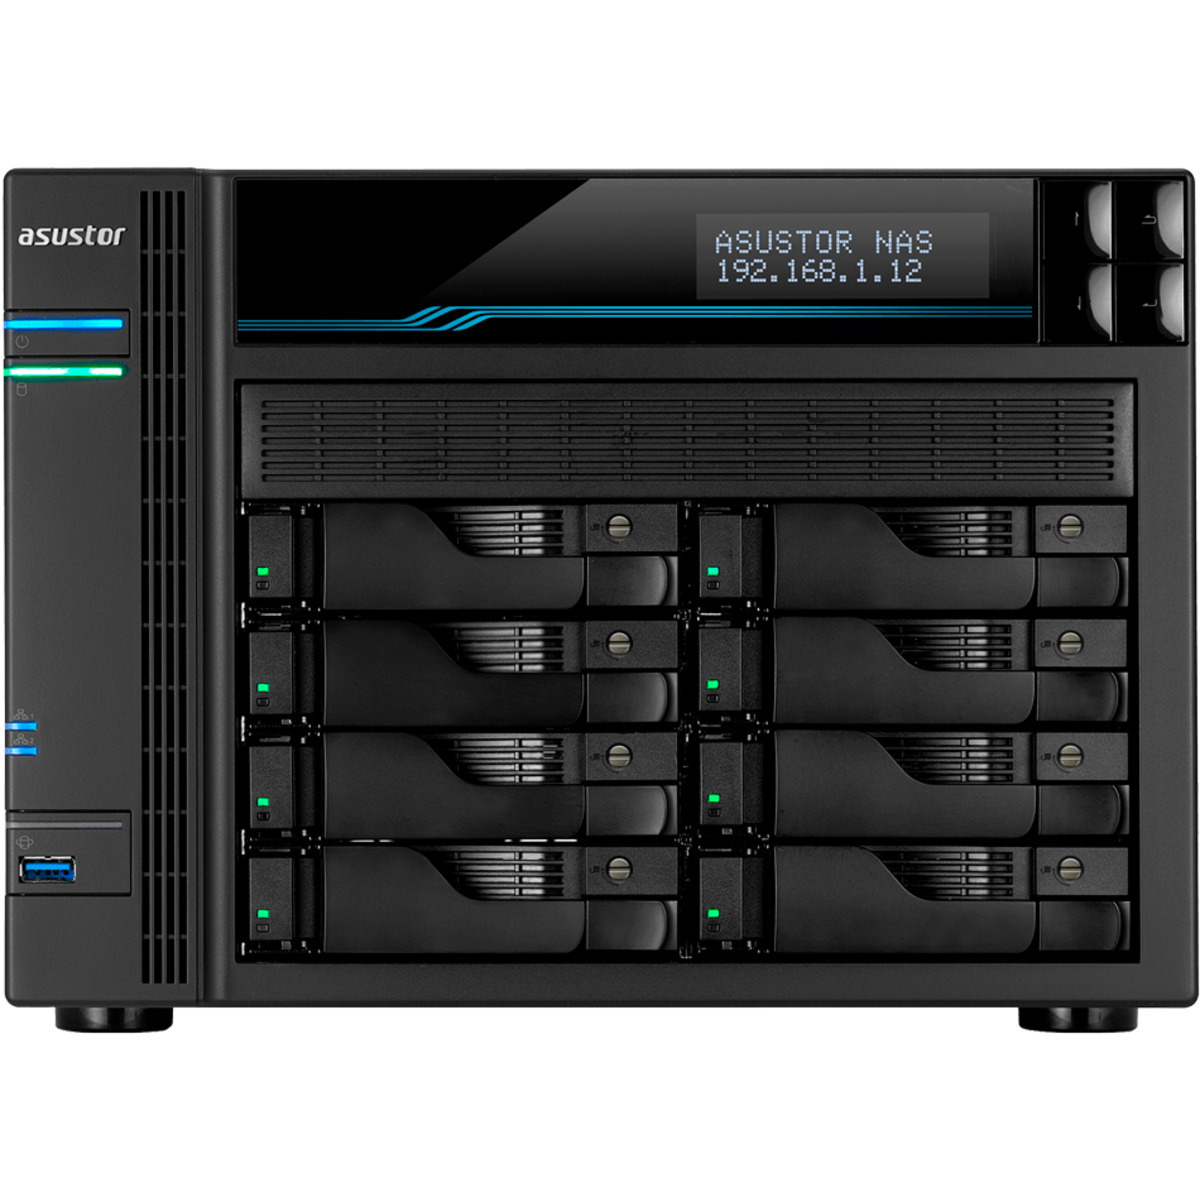 ASUSTOR AS6508T Lockerstor 8 70tb 8-Bay Desktop Multimedia / Power User / Business NAS - Network Attached Storage Device 5x14tb Toshiba Enterprise Capacity MG07ACA14TE 3.5 7200rpm SATA 6Gb/s HDD ENTERPRISE Class Drives Installed - Burn-In Tested - ON SALE - FREE RAM UPGRADE AS6508T Lockerstor 8